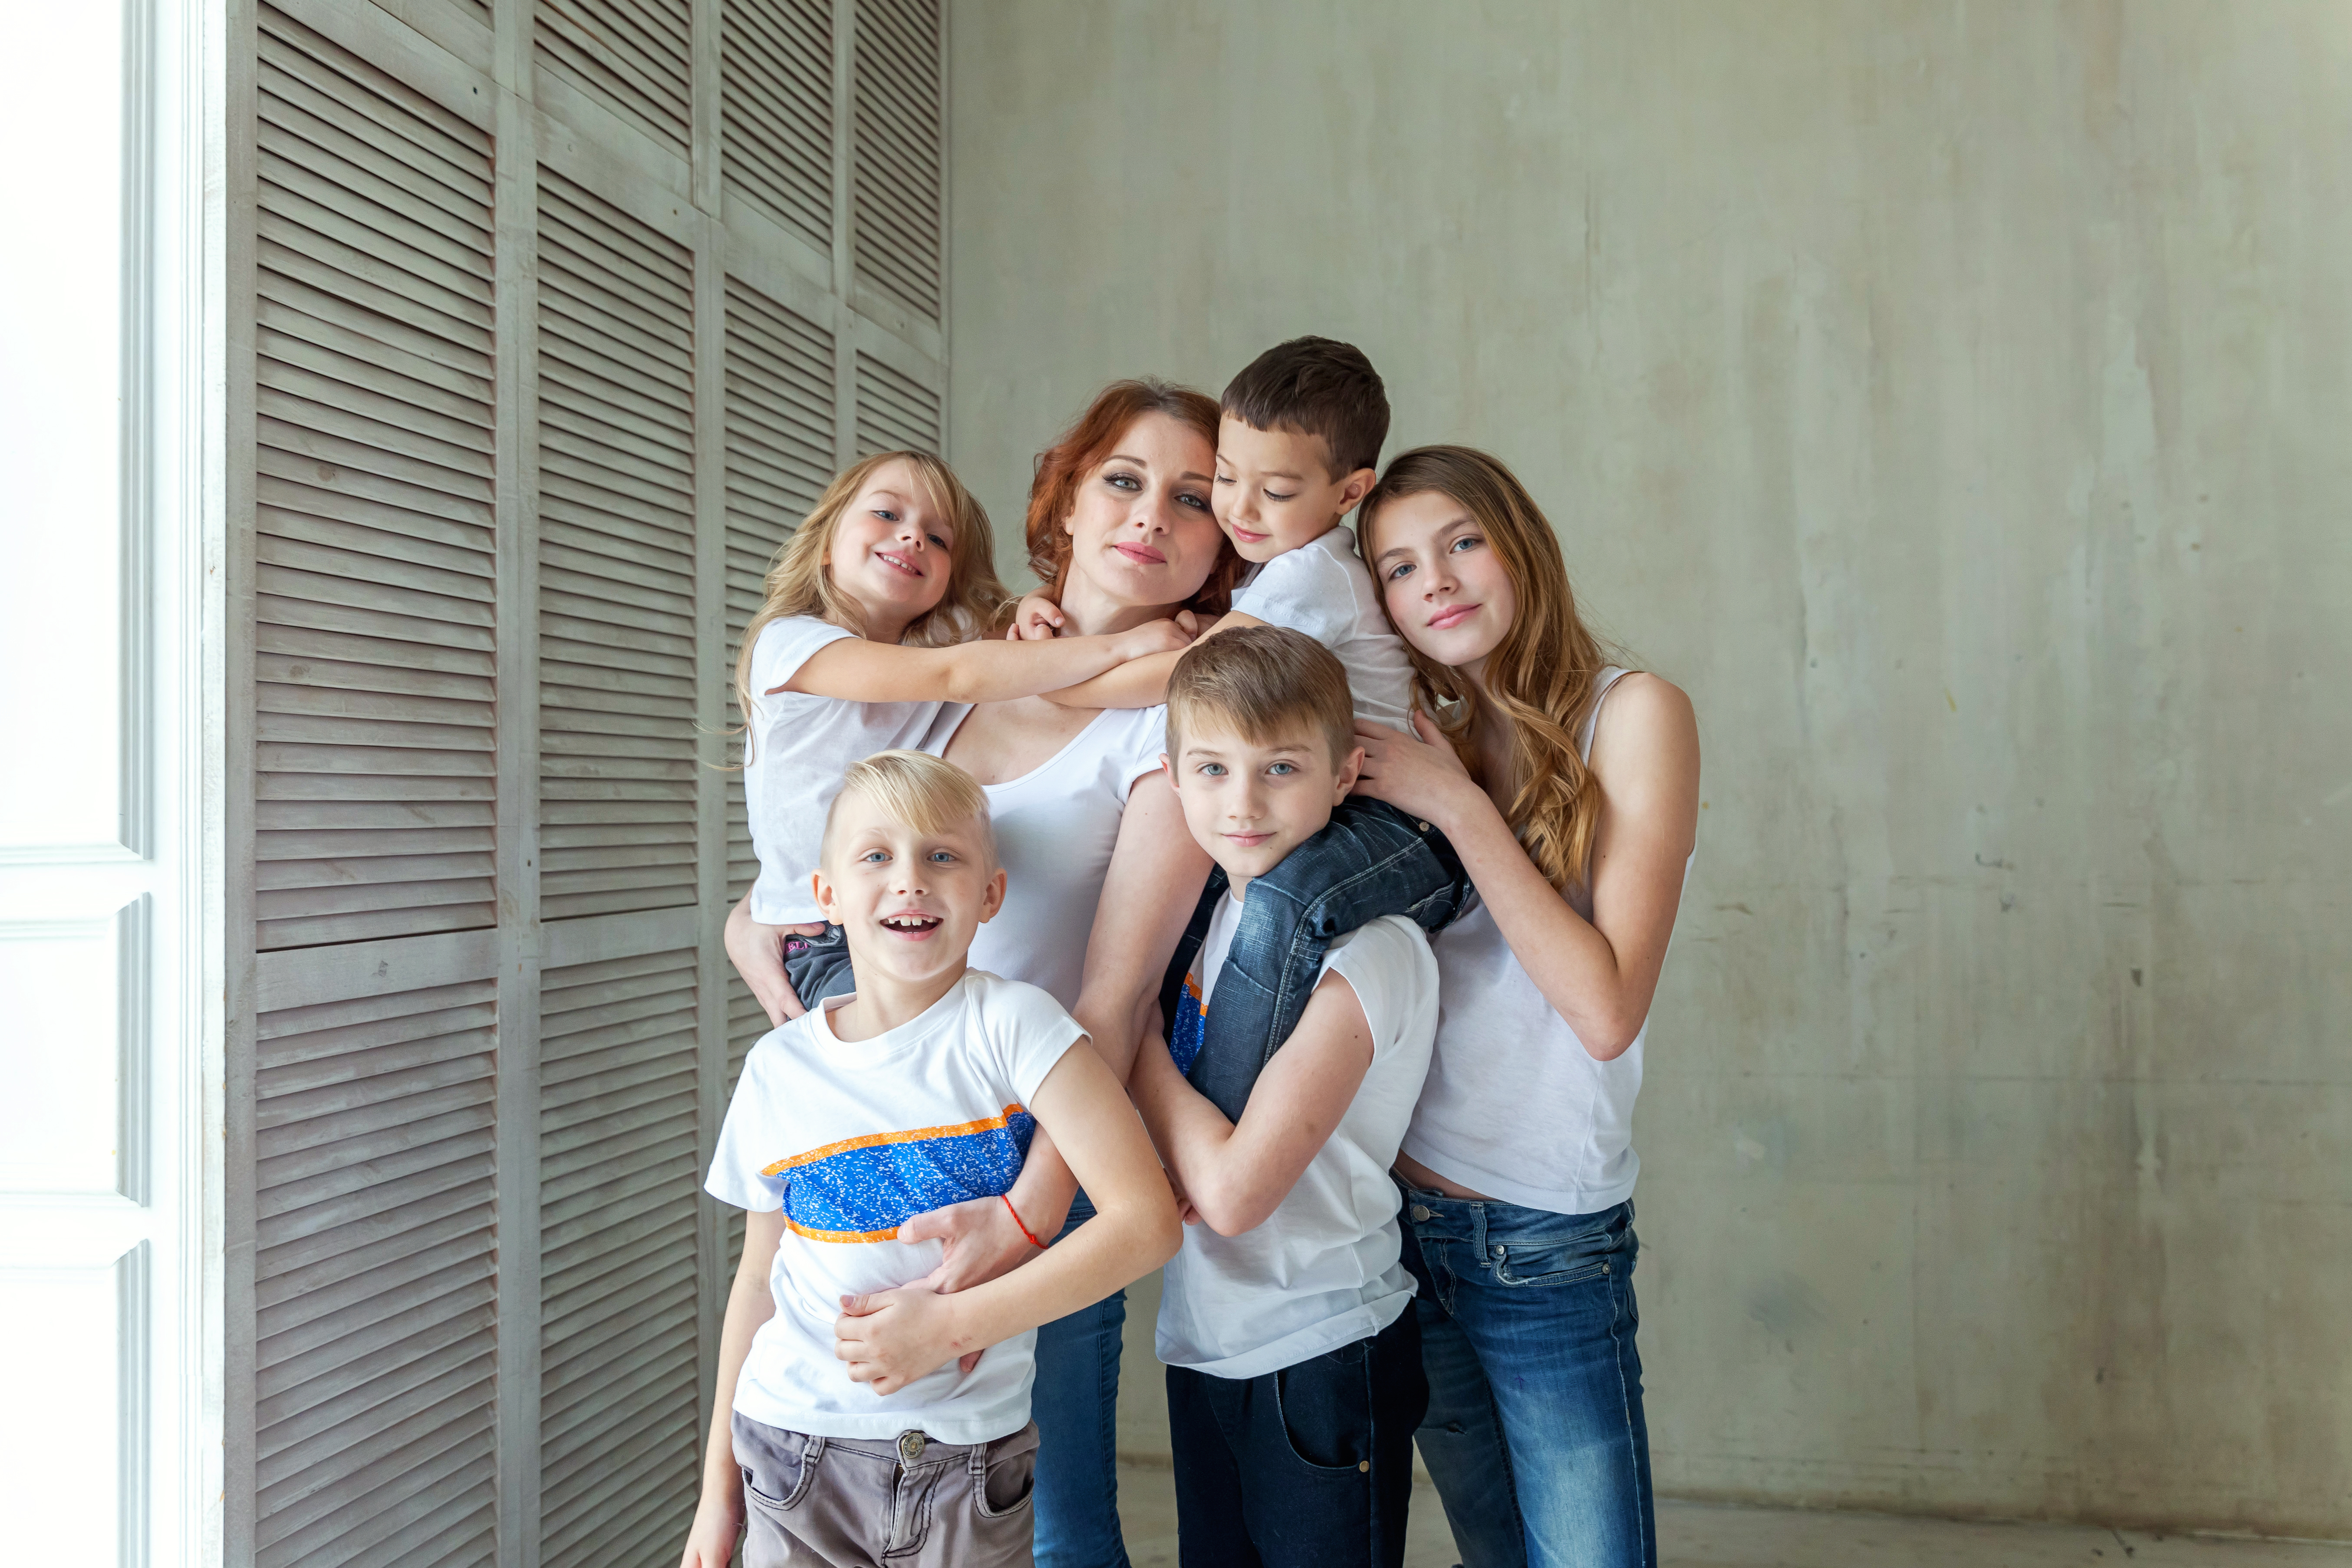 A happy mother with five children | Source: Shutterstock